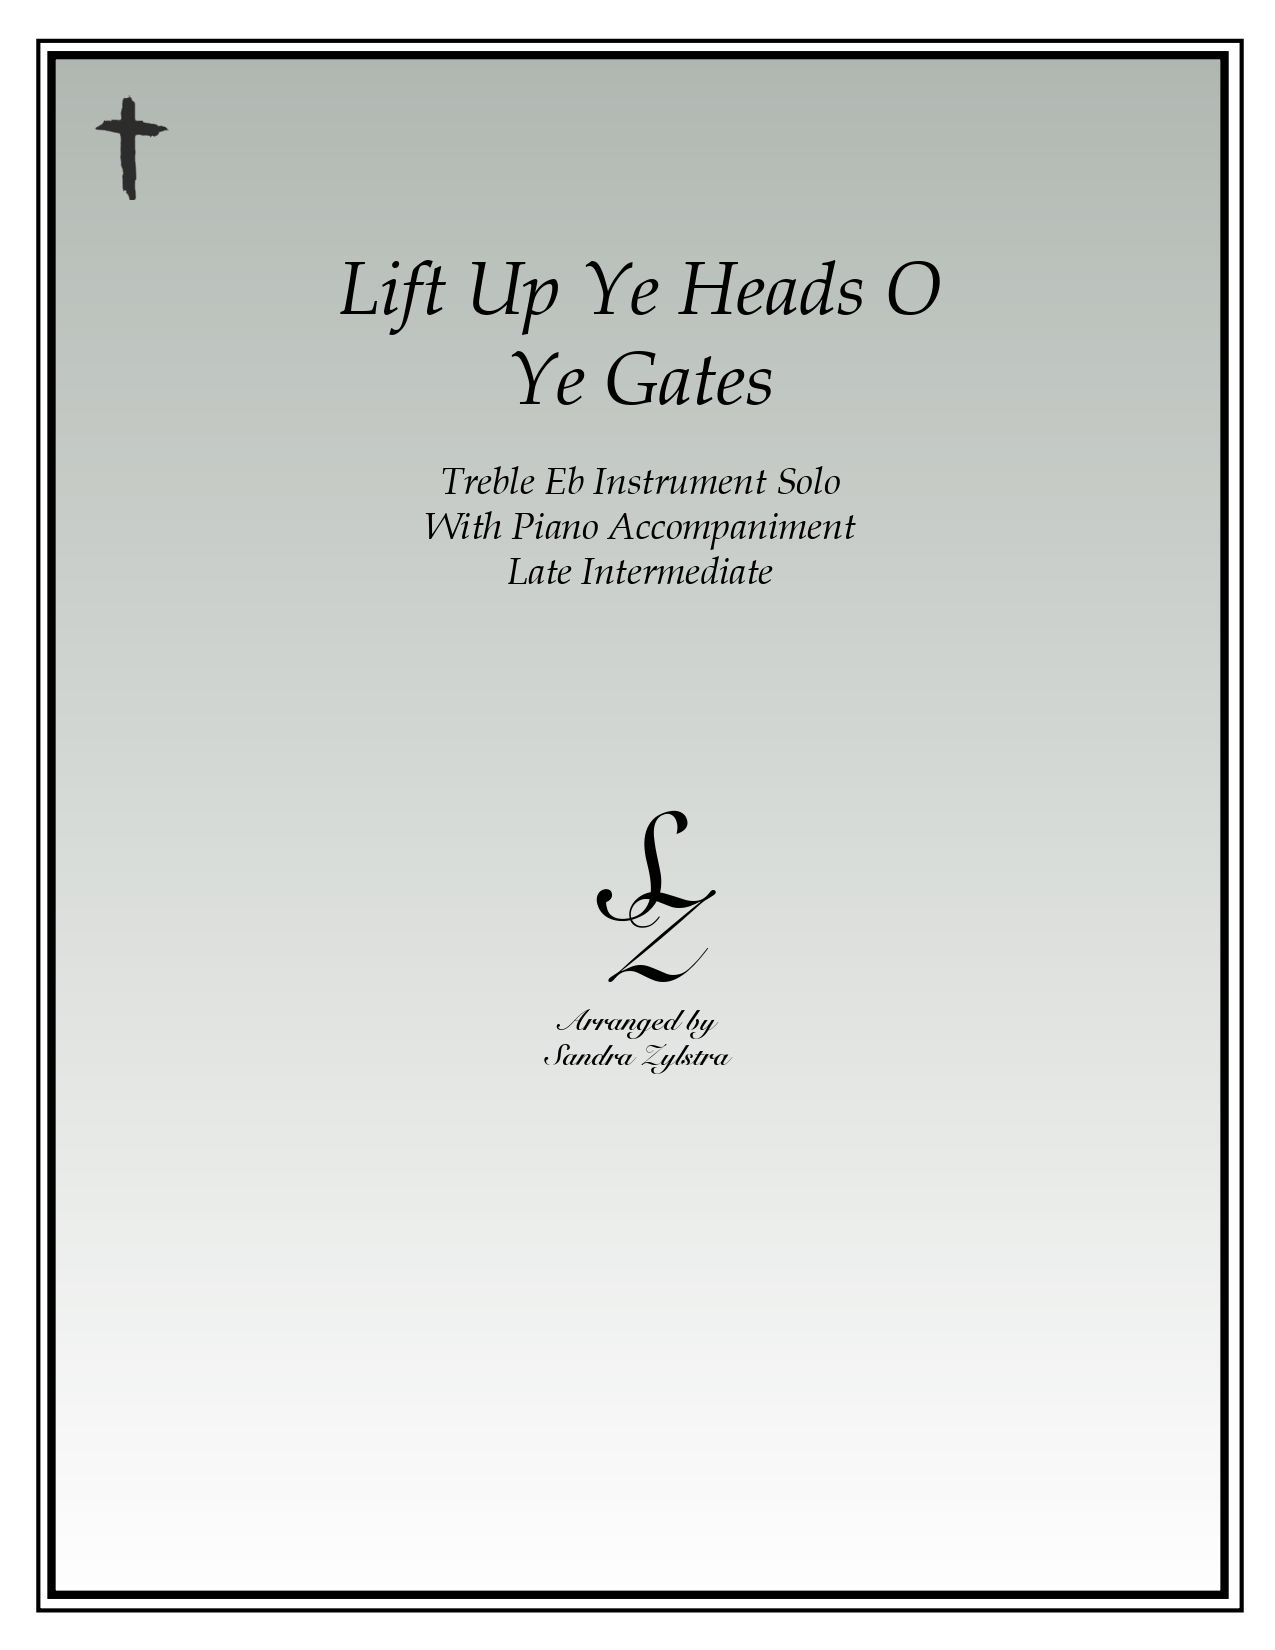 Lift Up Ye Heads O Ye Gates Eb instrument part cover page 00011